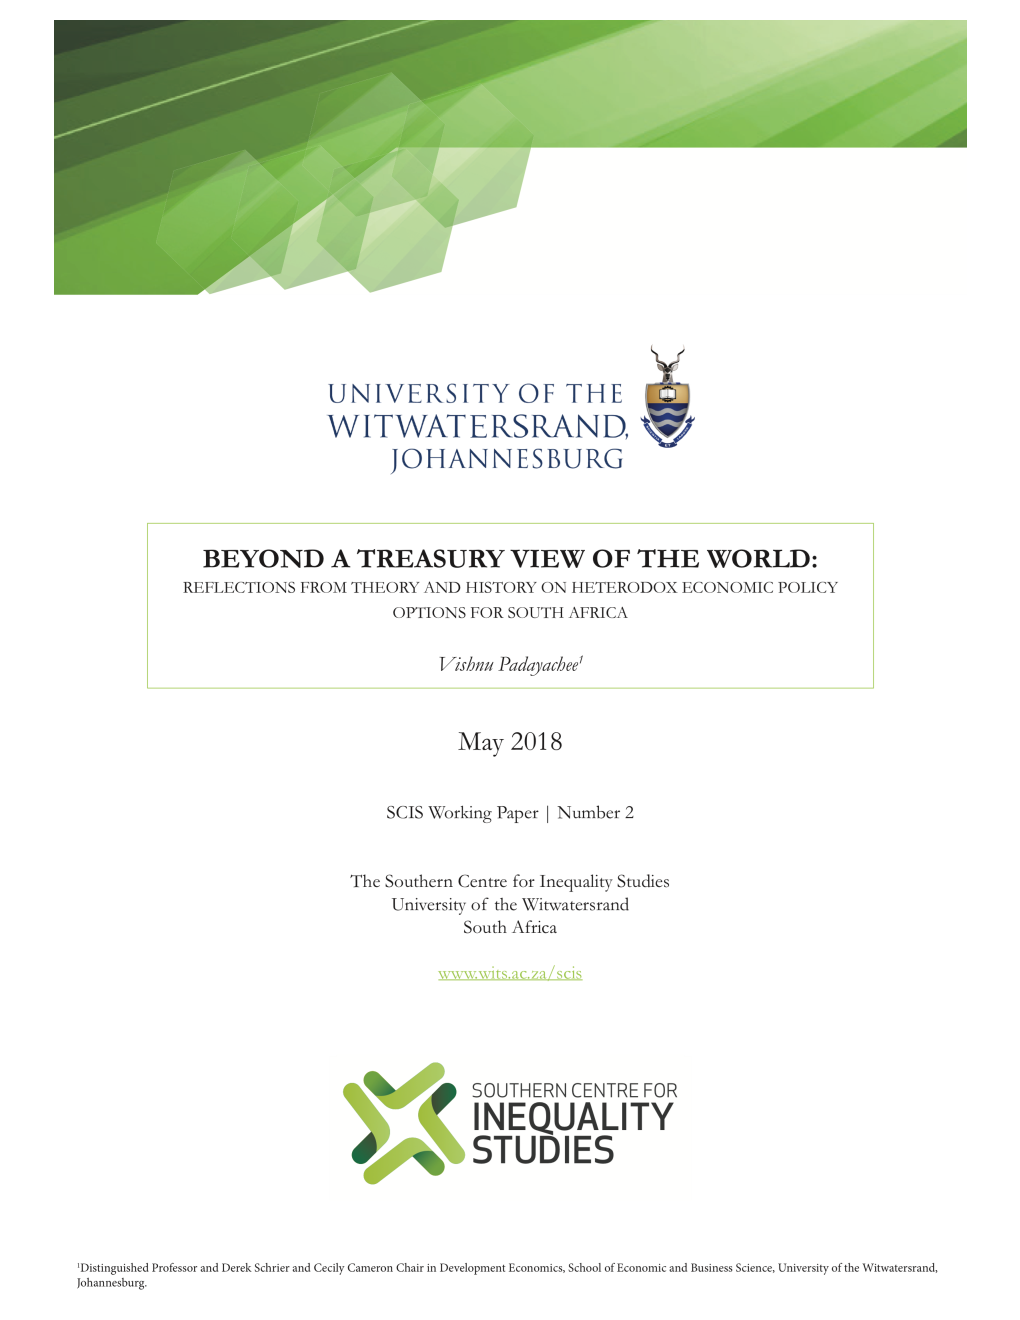 Beyond a Treasury View of the World: Reflections From